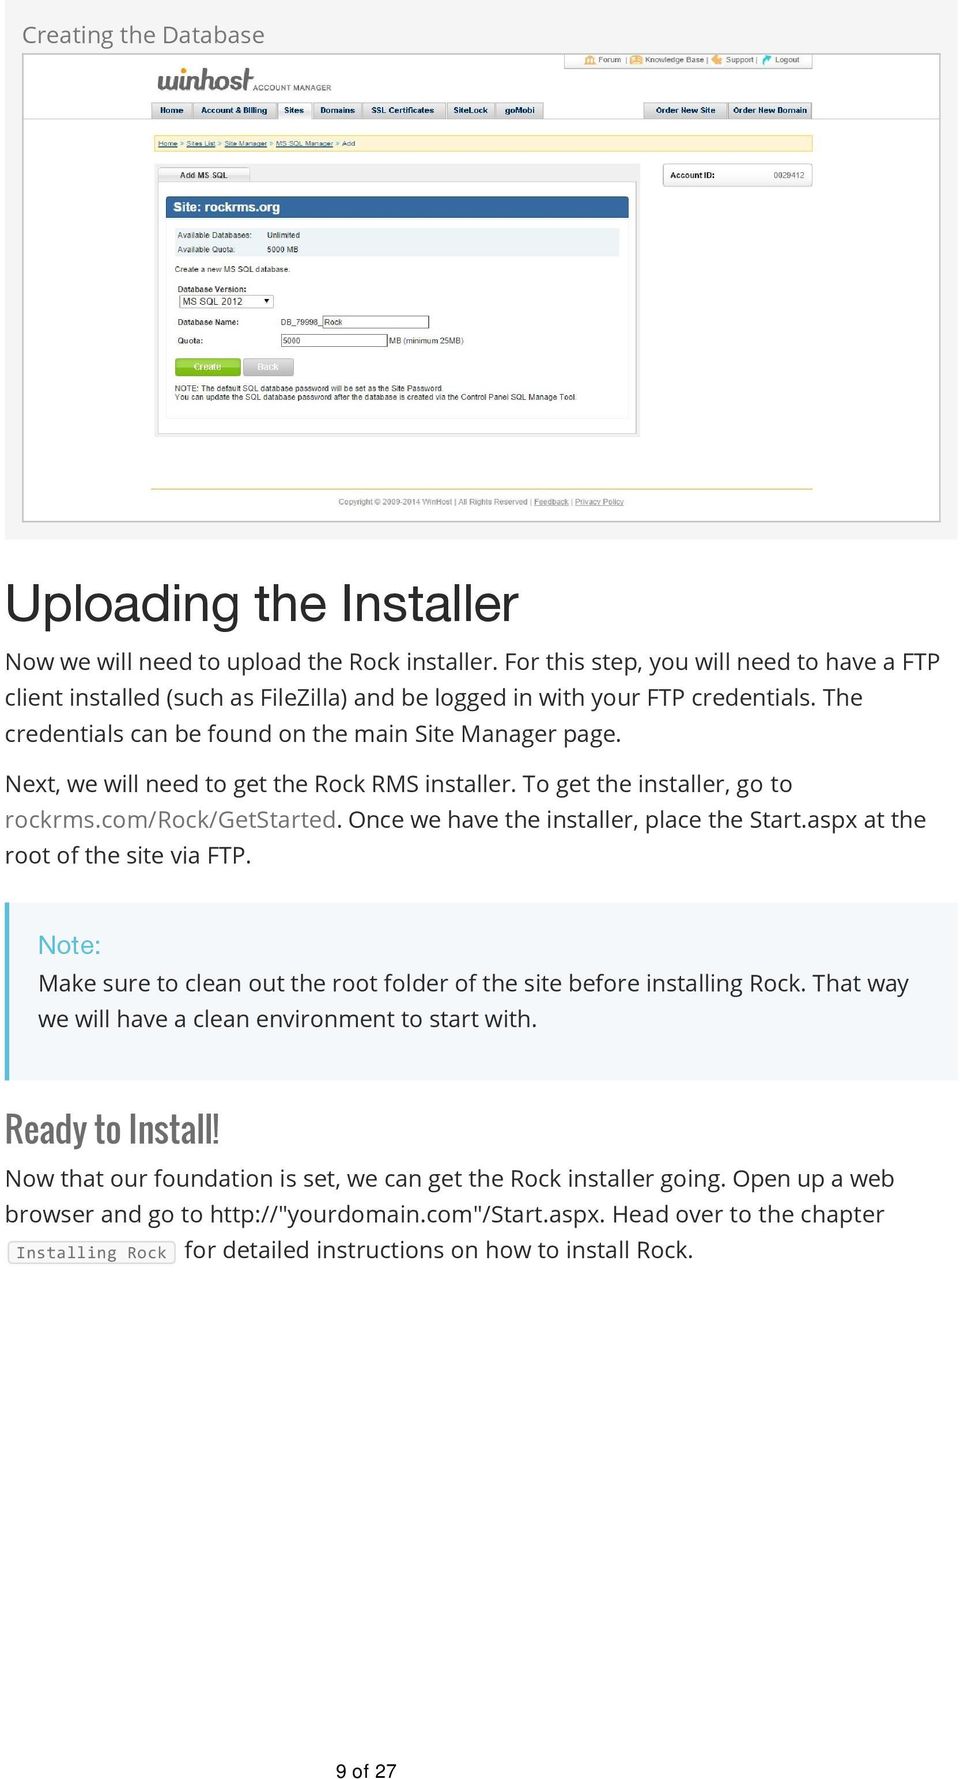 Next, we will need to get the Rock RMS installer. To get the installer, go to rockrms.com/rock/getstarted. Once we have the installer, place the Start.aspx at the root of the site via FTP.